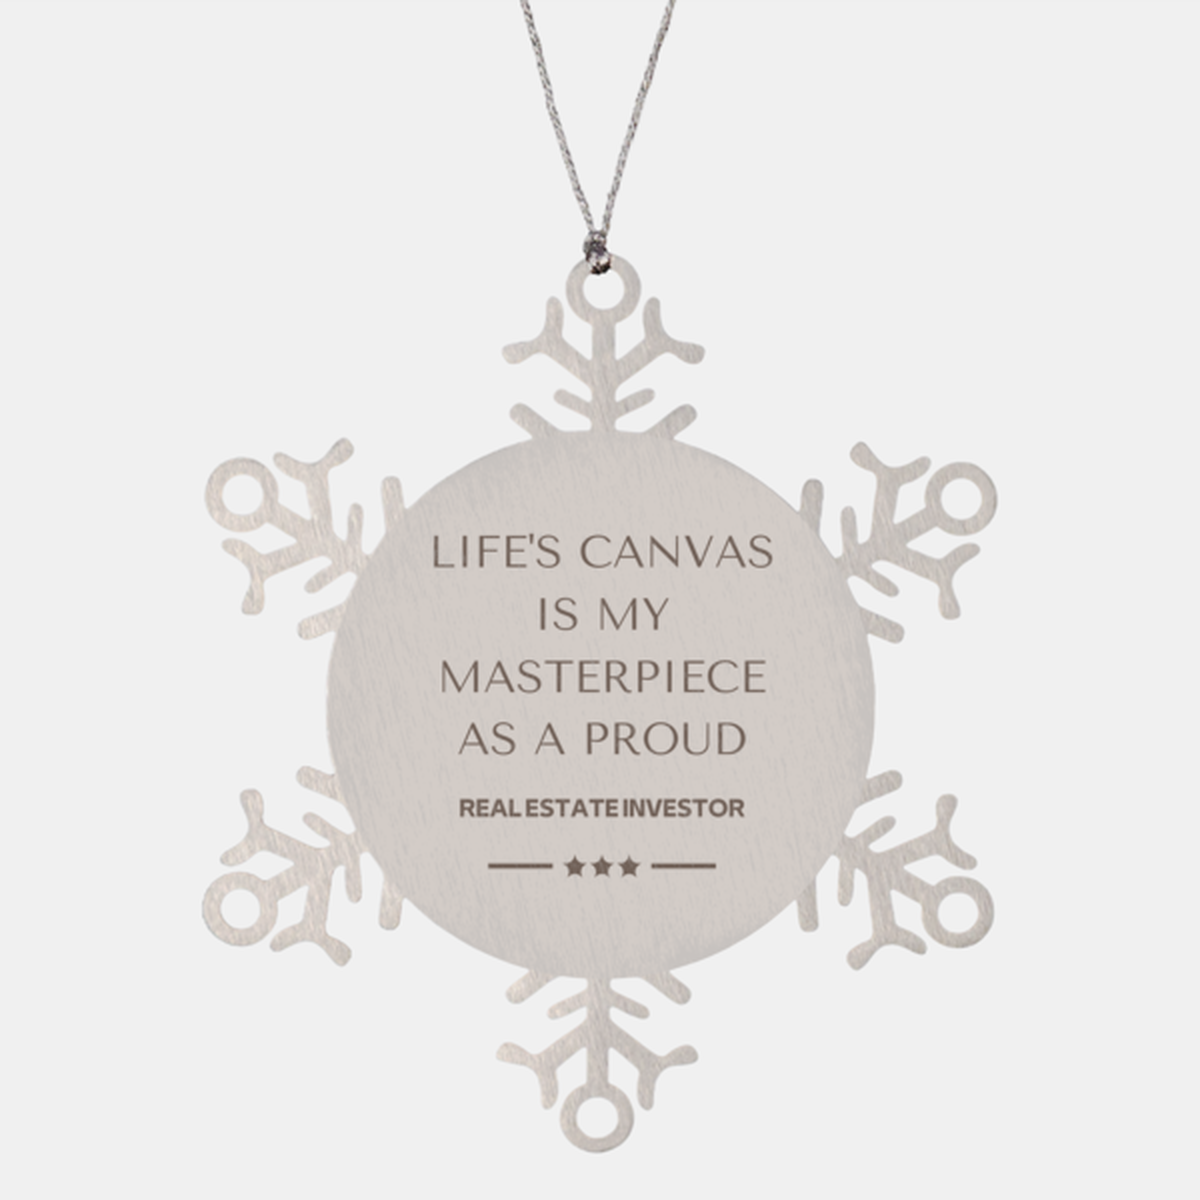 Proud Real Estate Investor Gifts, Life's canvas is my masterpiece, Epic Birthday Christmas Unique Snowflake Ornament For Real Estate Investor, Coworkers, Men, Women, Friends